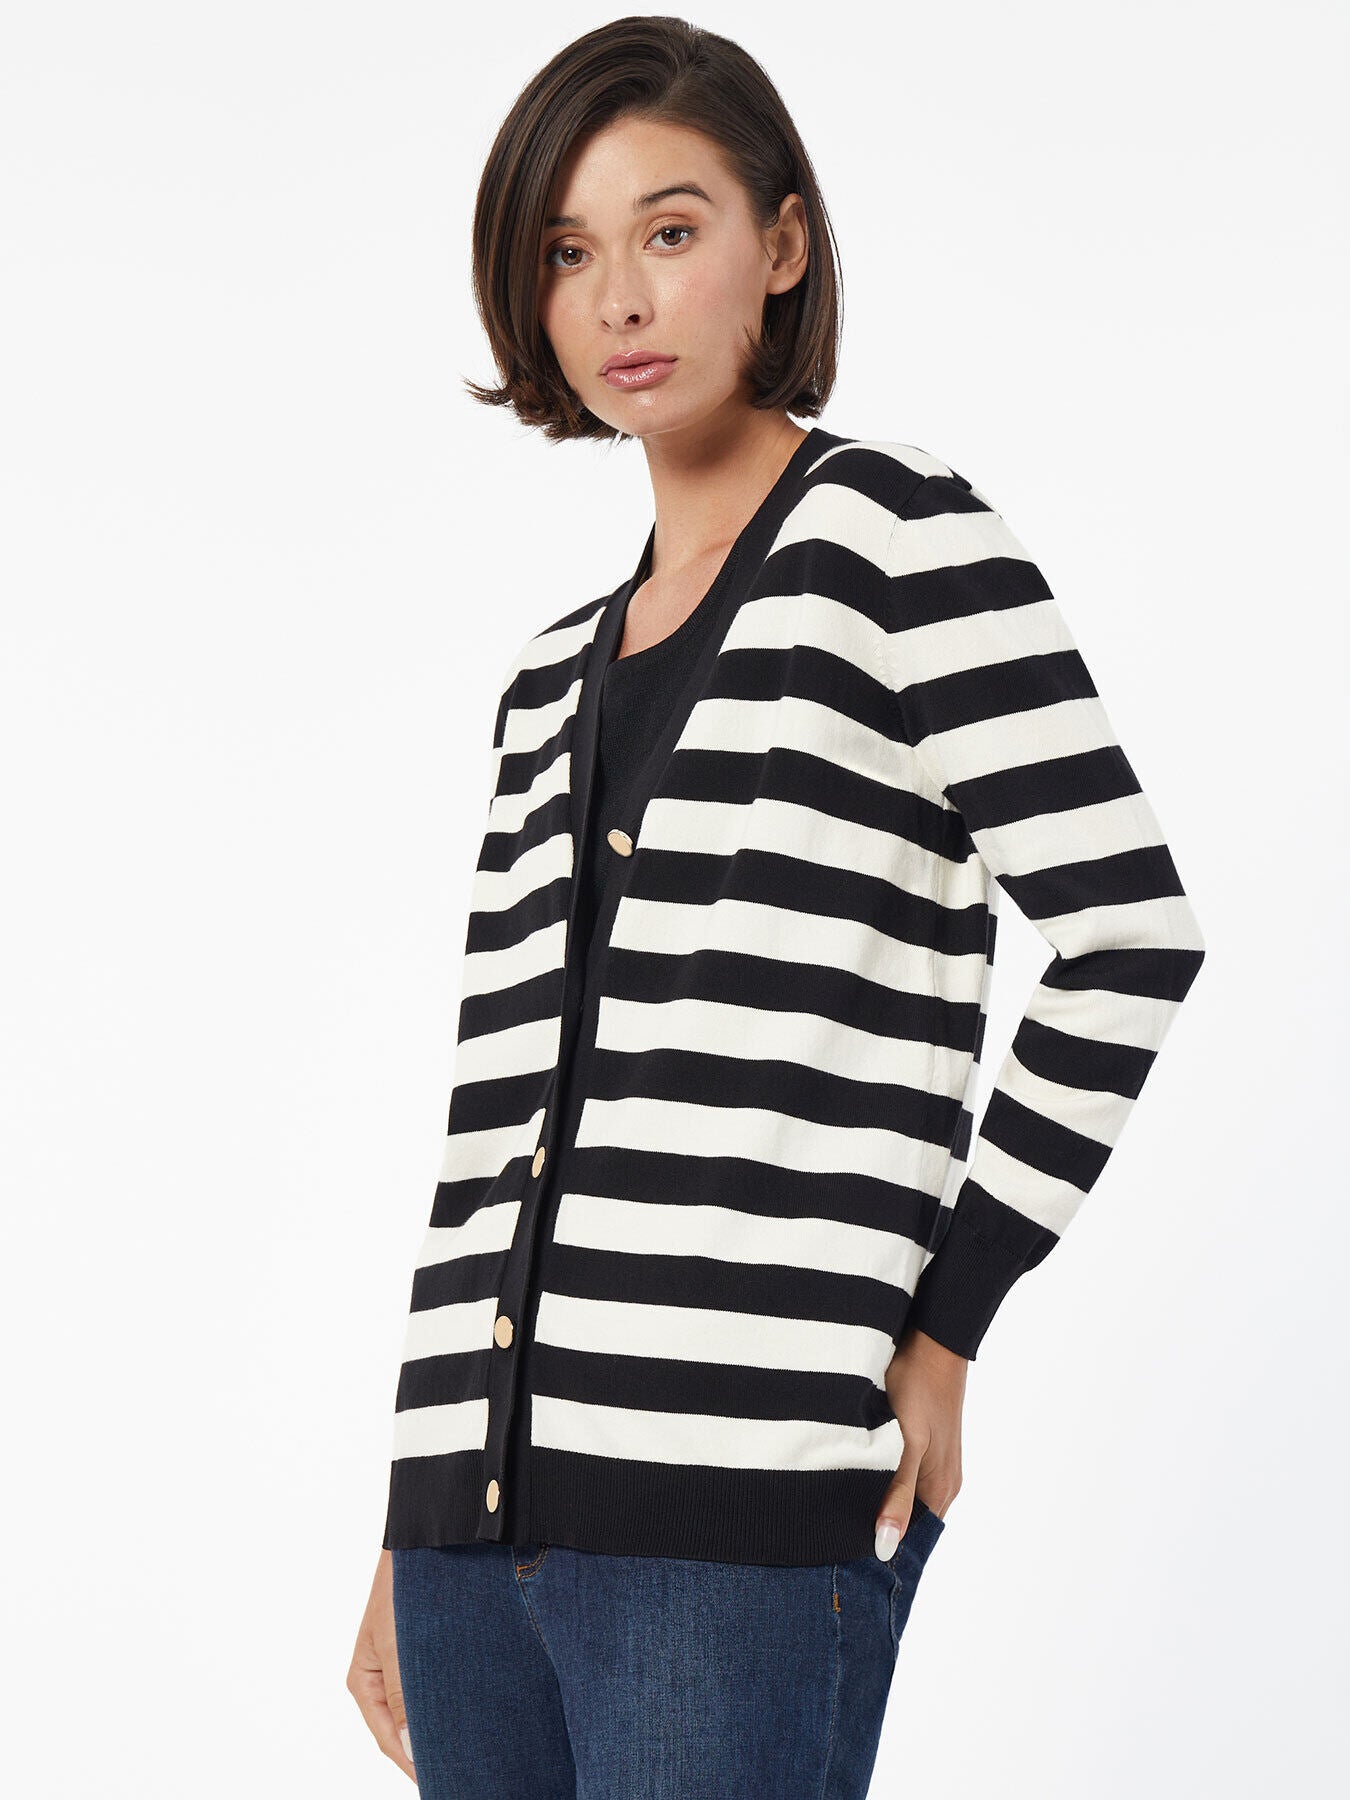 Women's White and Black Horizontal Striped Open Cardigan, White Crew-neck  T-shirt, Black Leather Leggings, Navy Low Top Sneakers